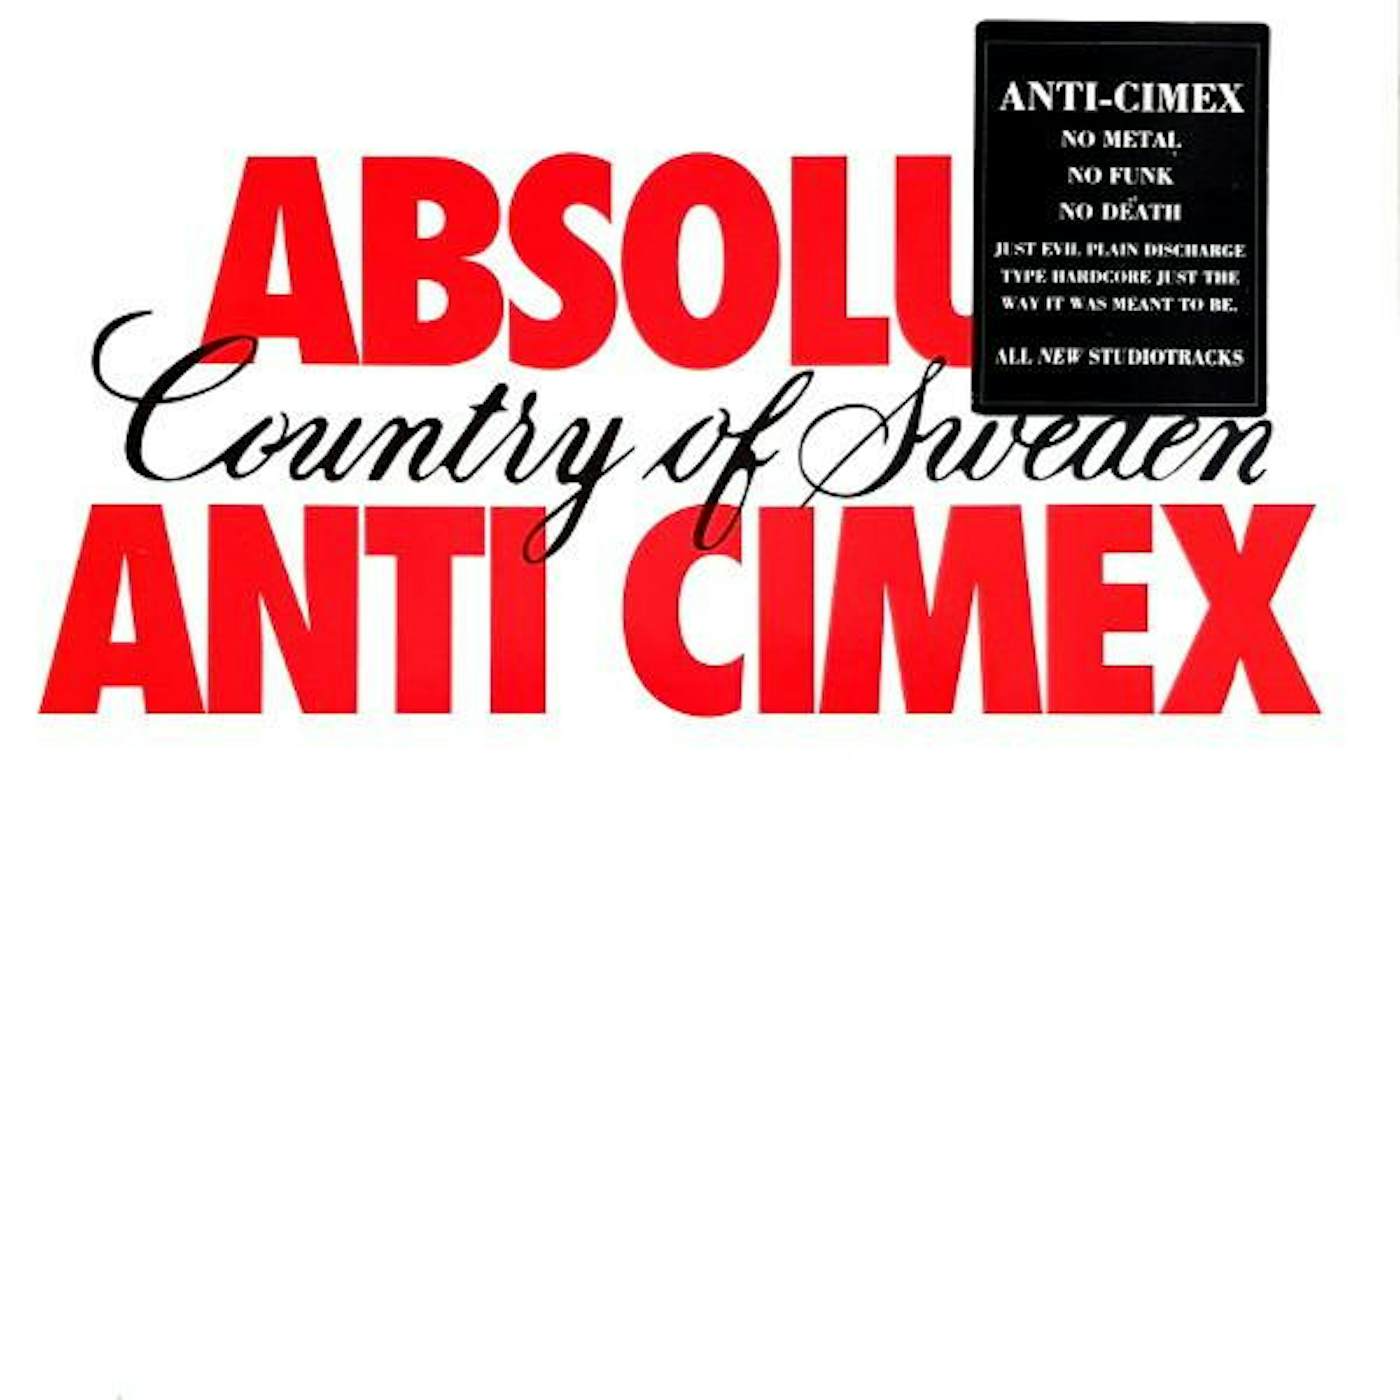 Anti Cimex Absolut Country of Sweden Vinyl Record